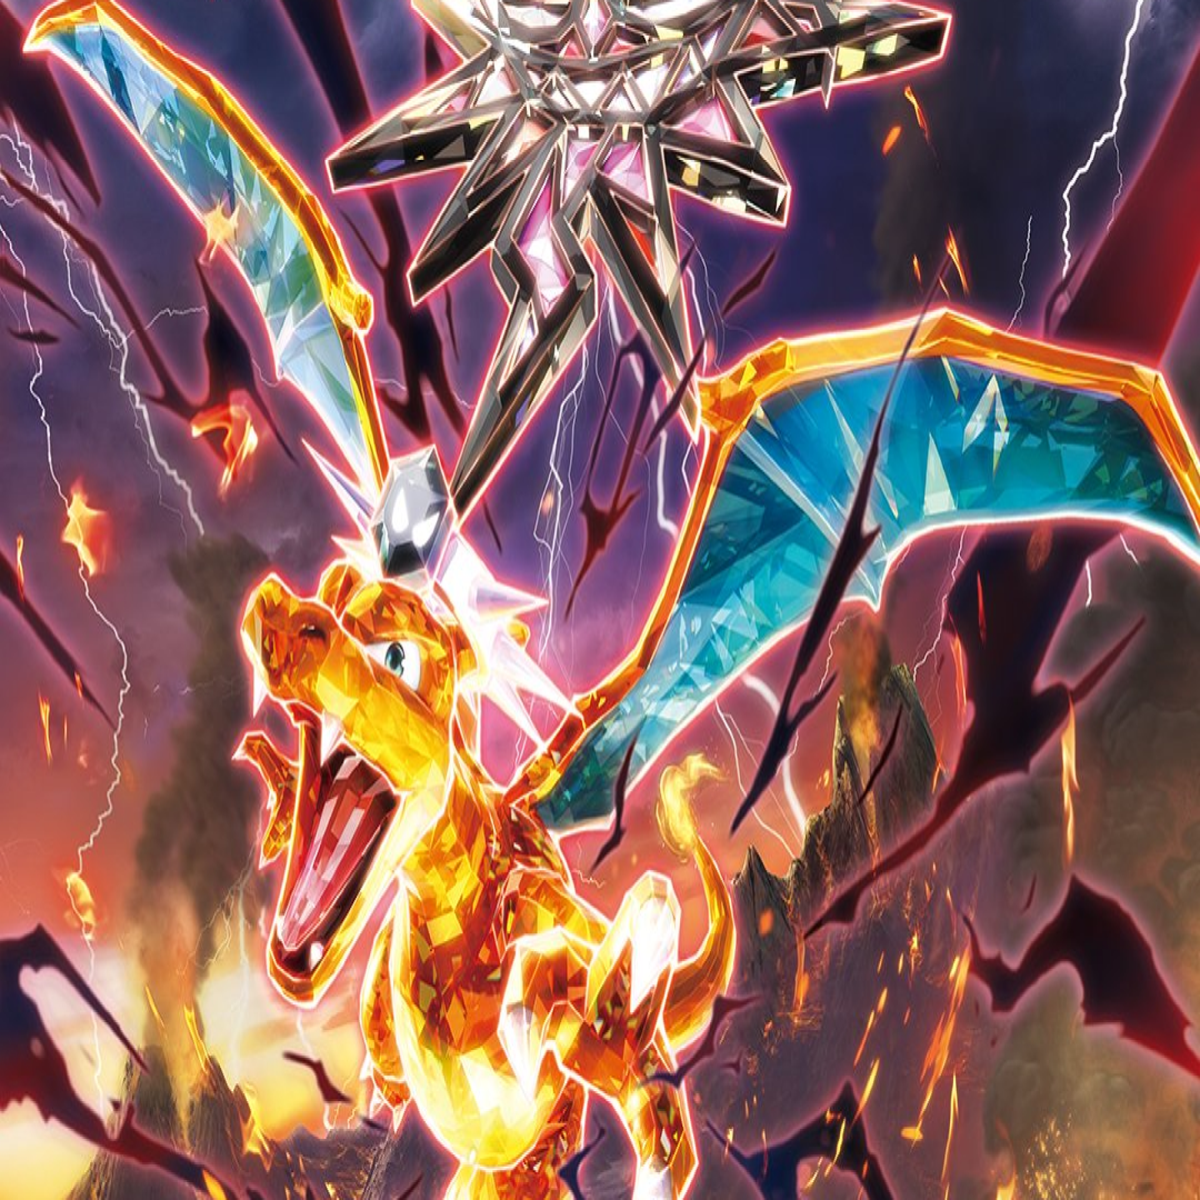 Take at type-shifted Charizard other Pokémon from upcoming Obsidian Flame card set | Dicebreaker